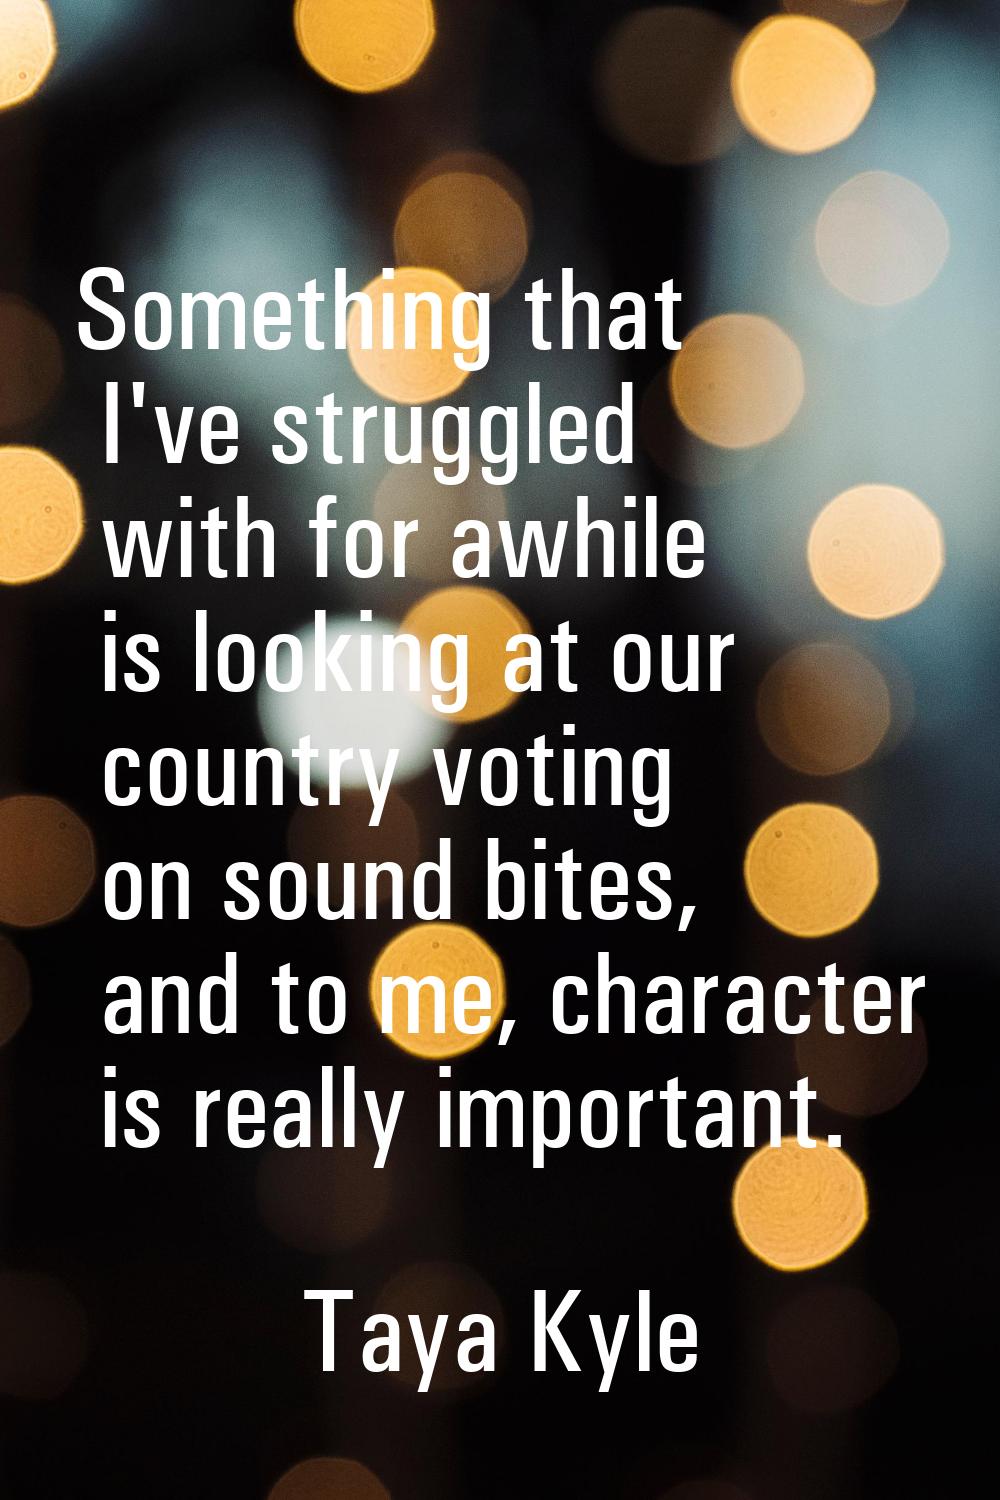 Something that I've struggled with for awhile is looking at our country voting on sound bites, and 